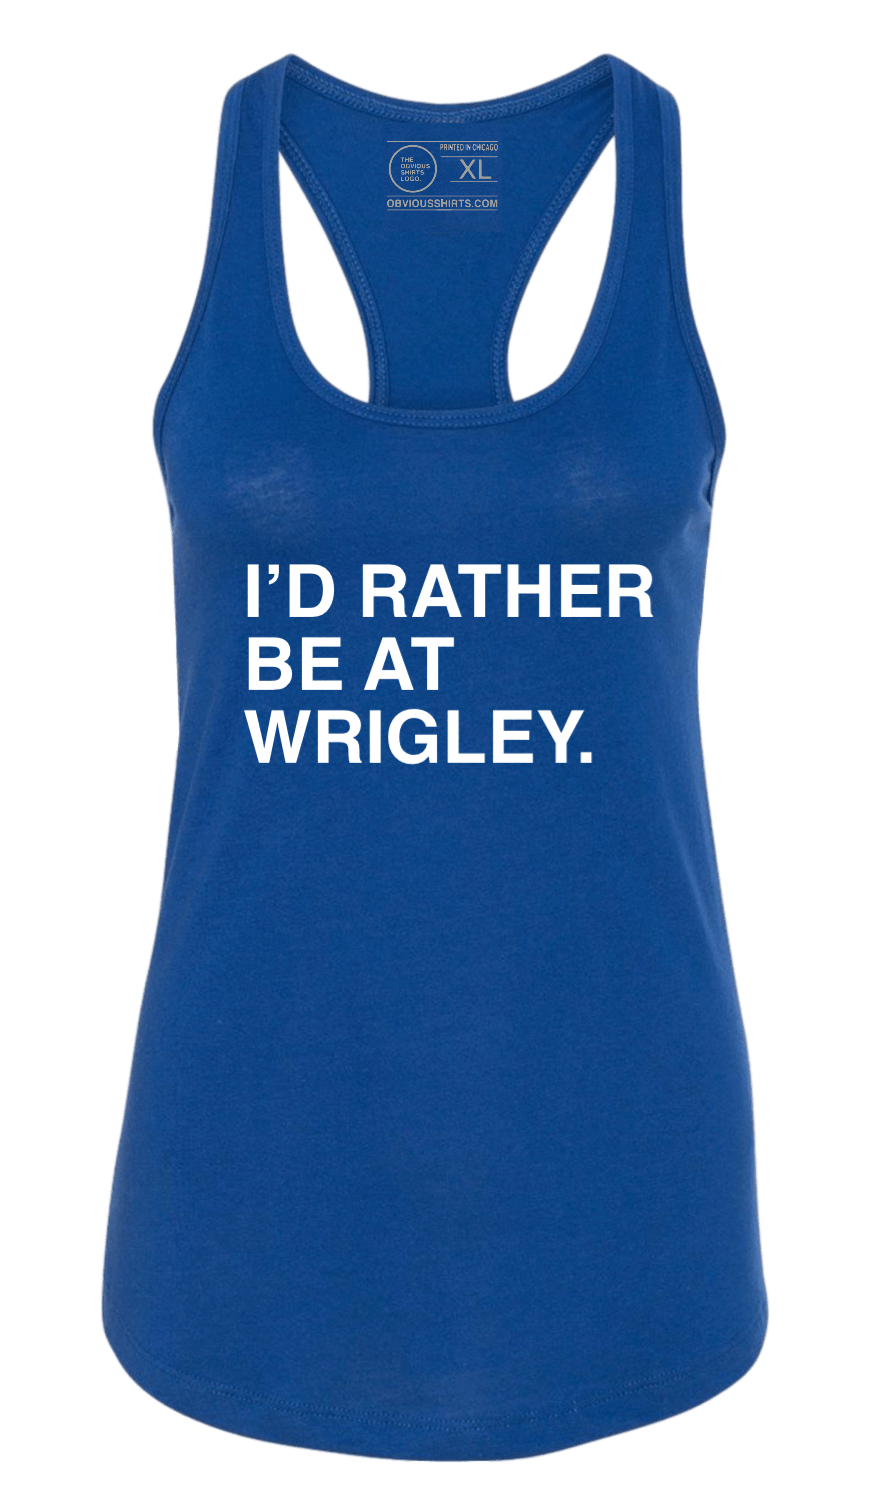 I'D RATHER BE AT WRIGLEY. (WOMEN'S TANK) - OBVIOUS SHIRTS.